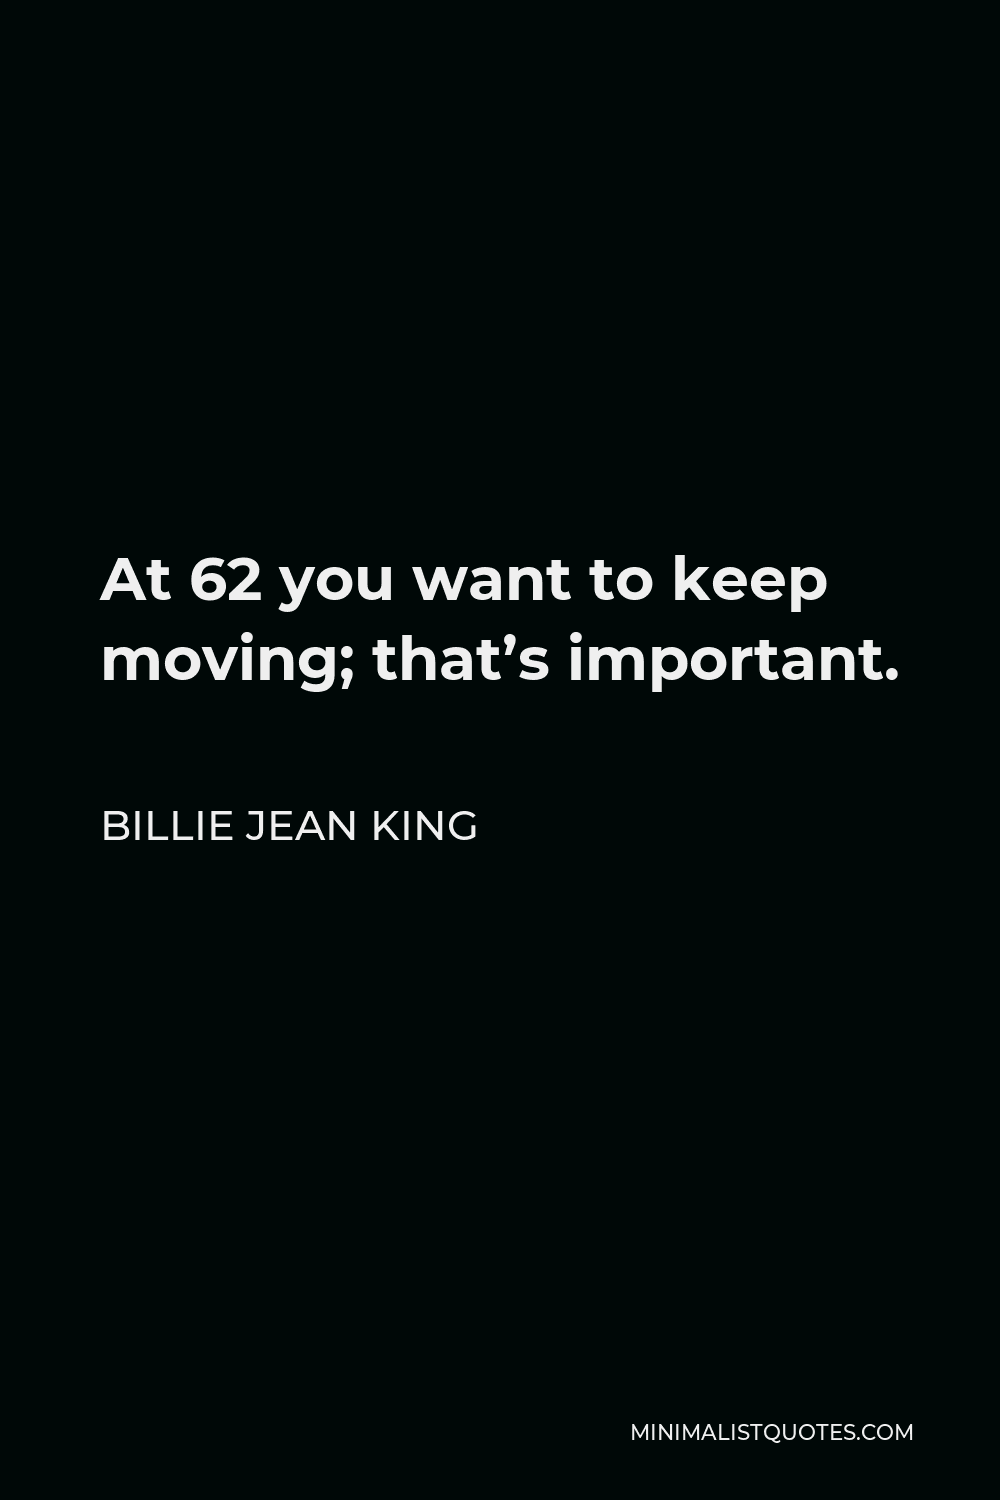 Billie Jean King Quote - At 62 you want to keep moving; that’s important.